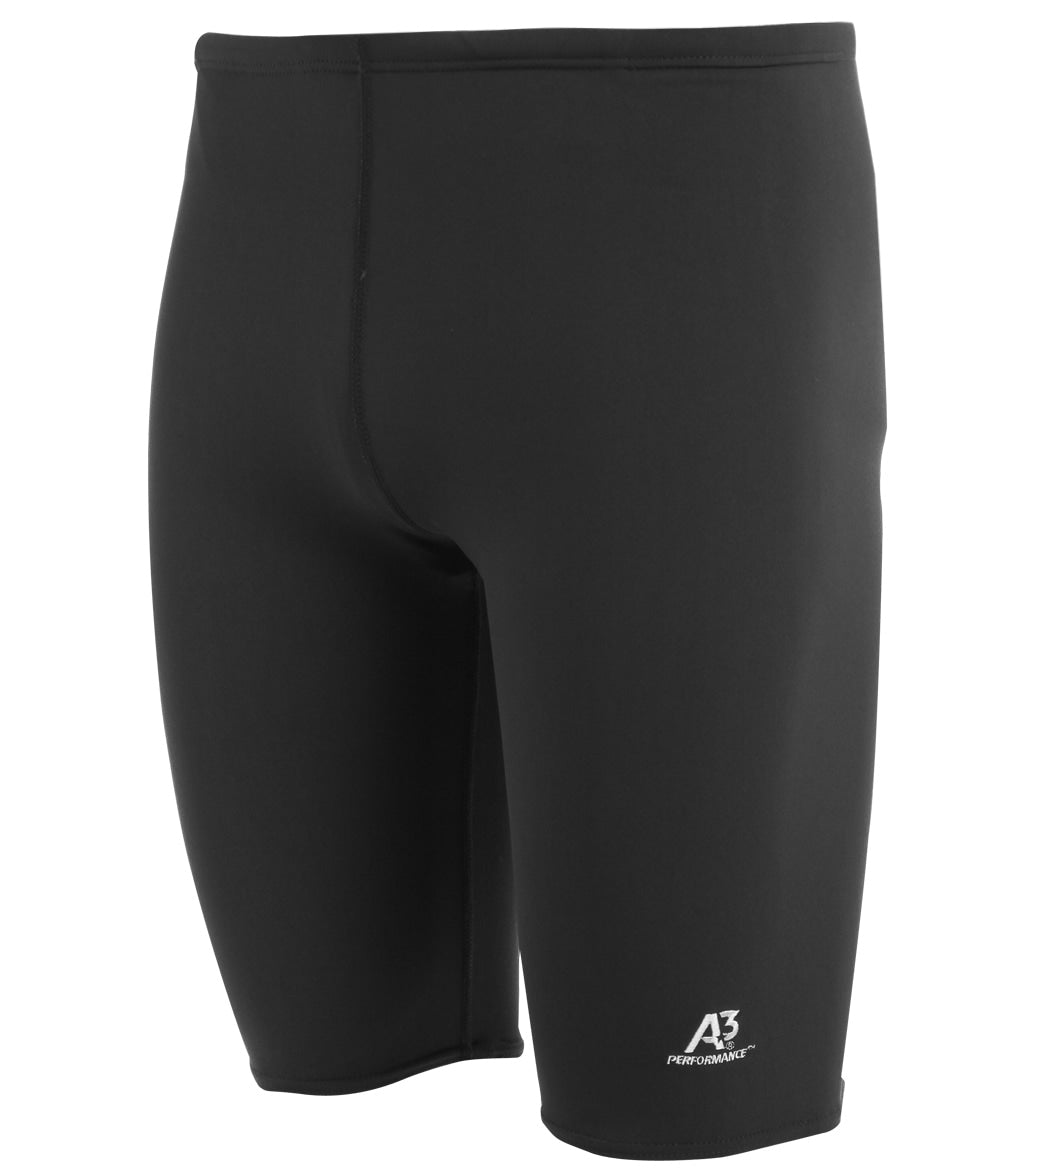 A3 Performance Poly Jammer Swimsuit Black at SwimOutlet.com